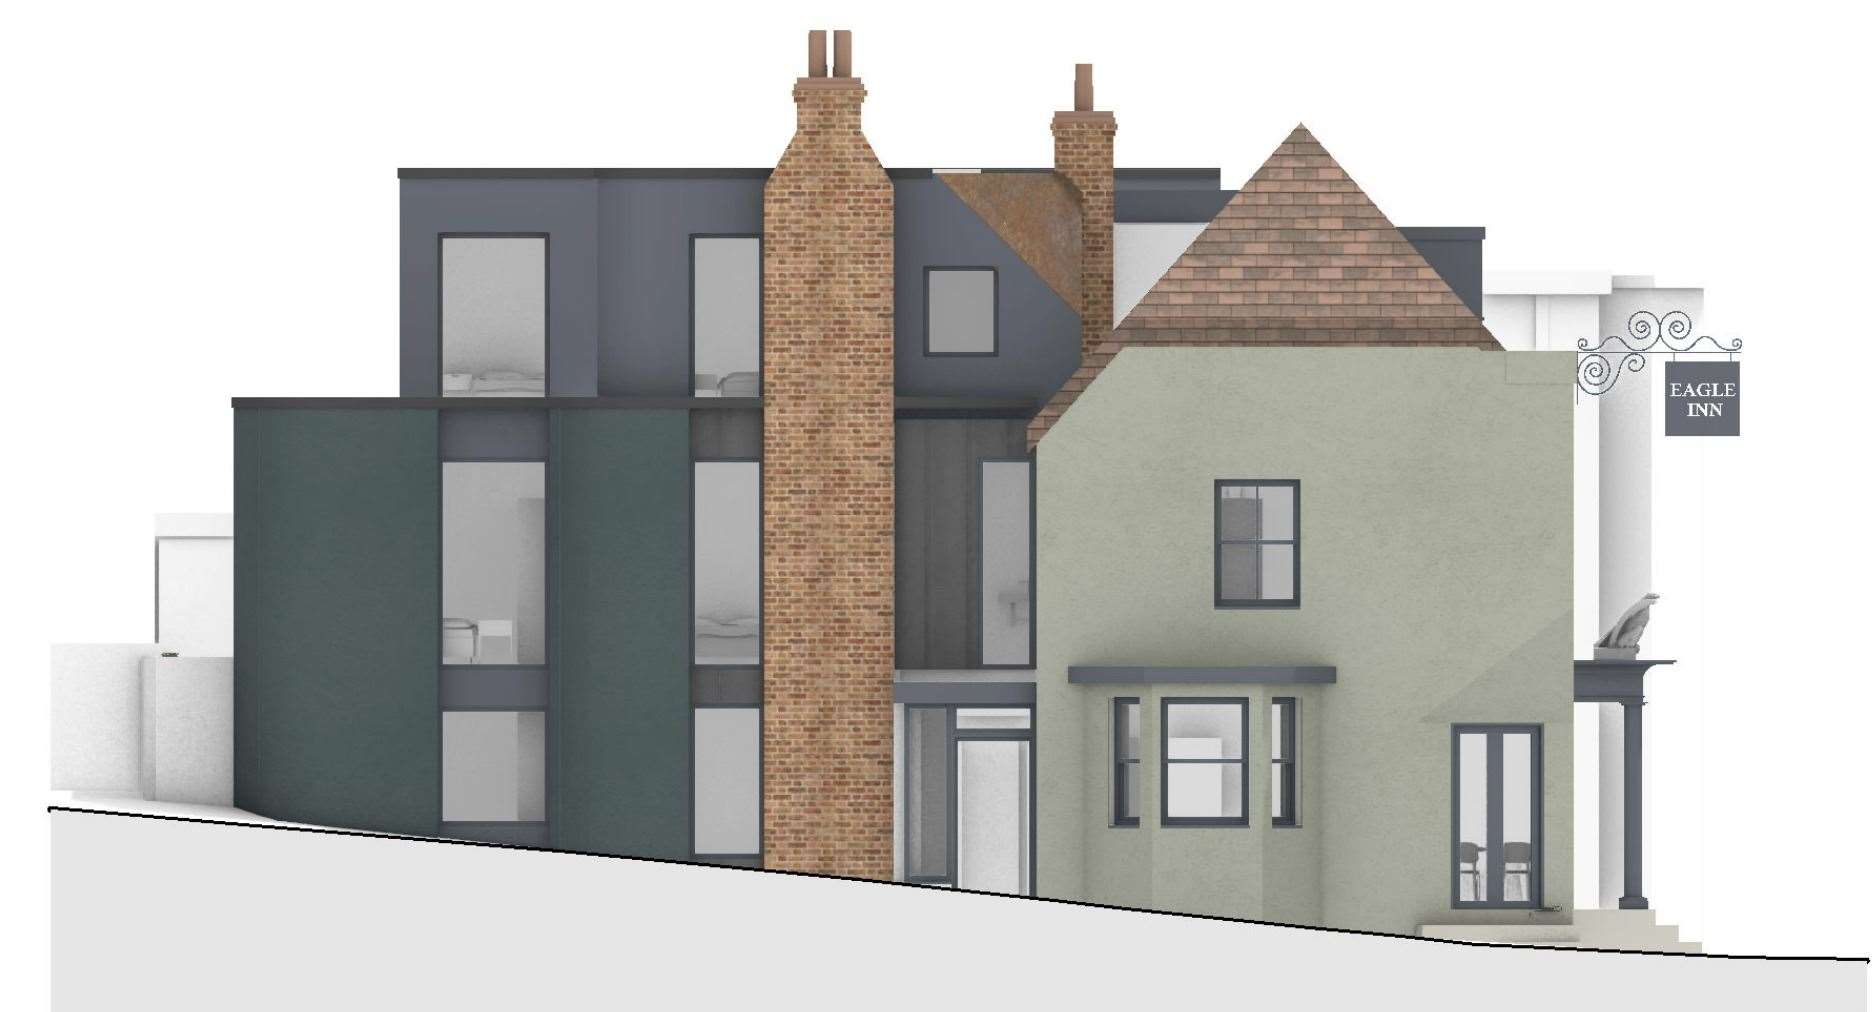 What the new hotel at the Eagle Inn, Ramsgate, could look like